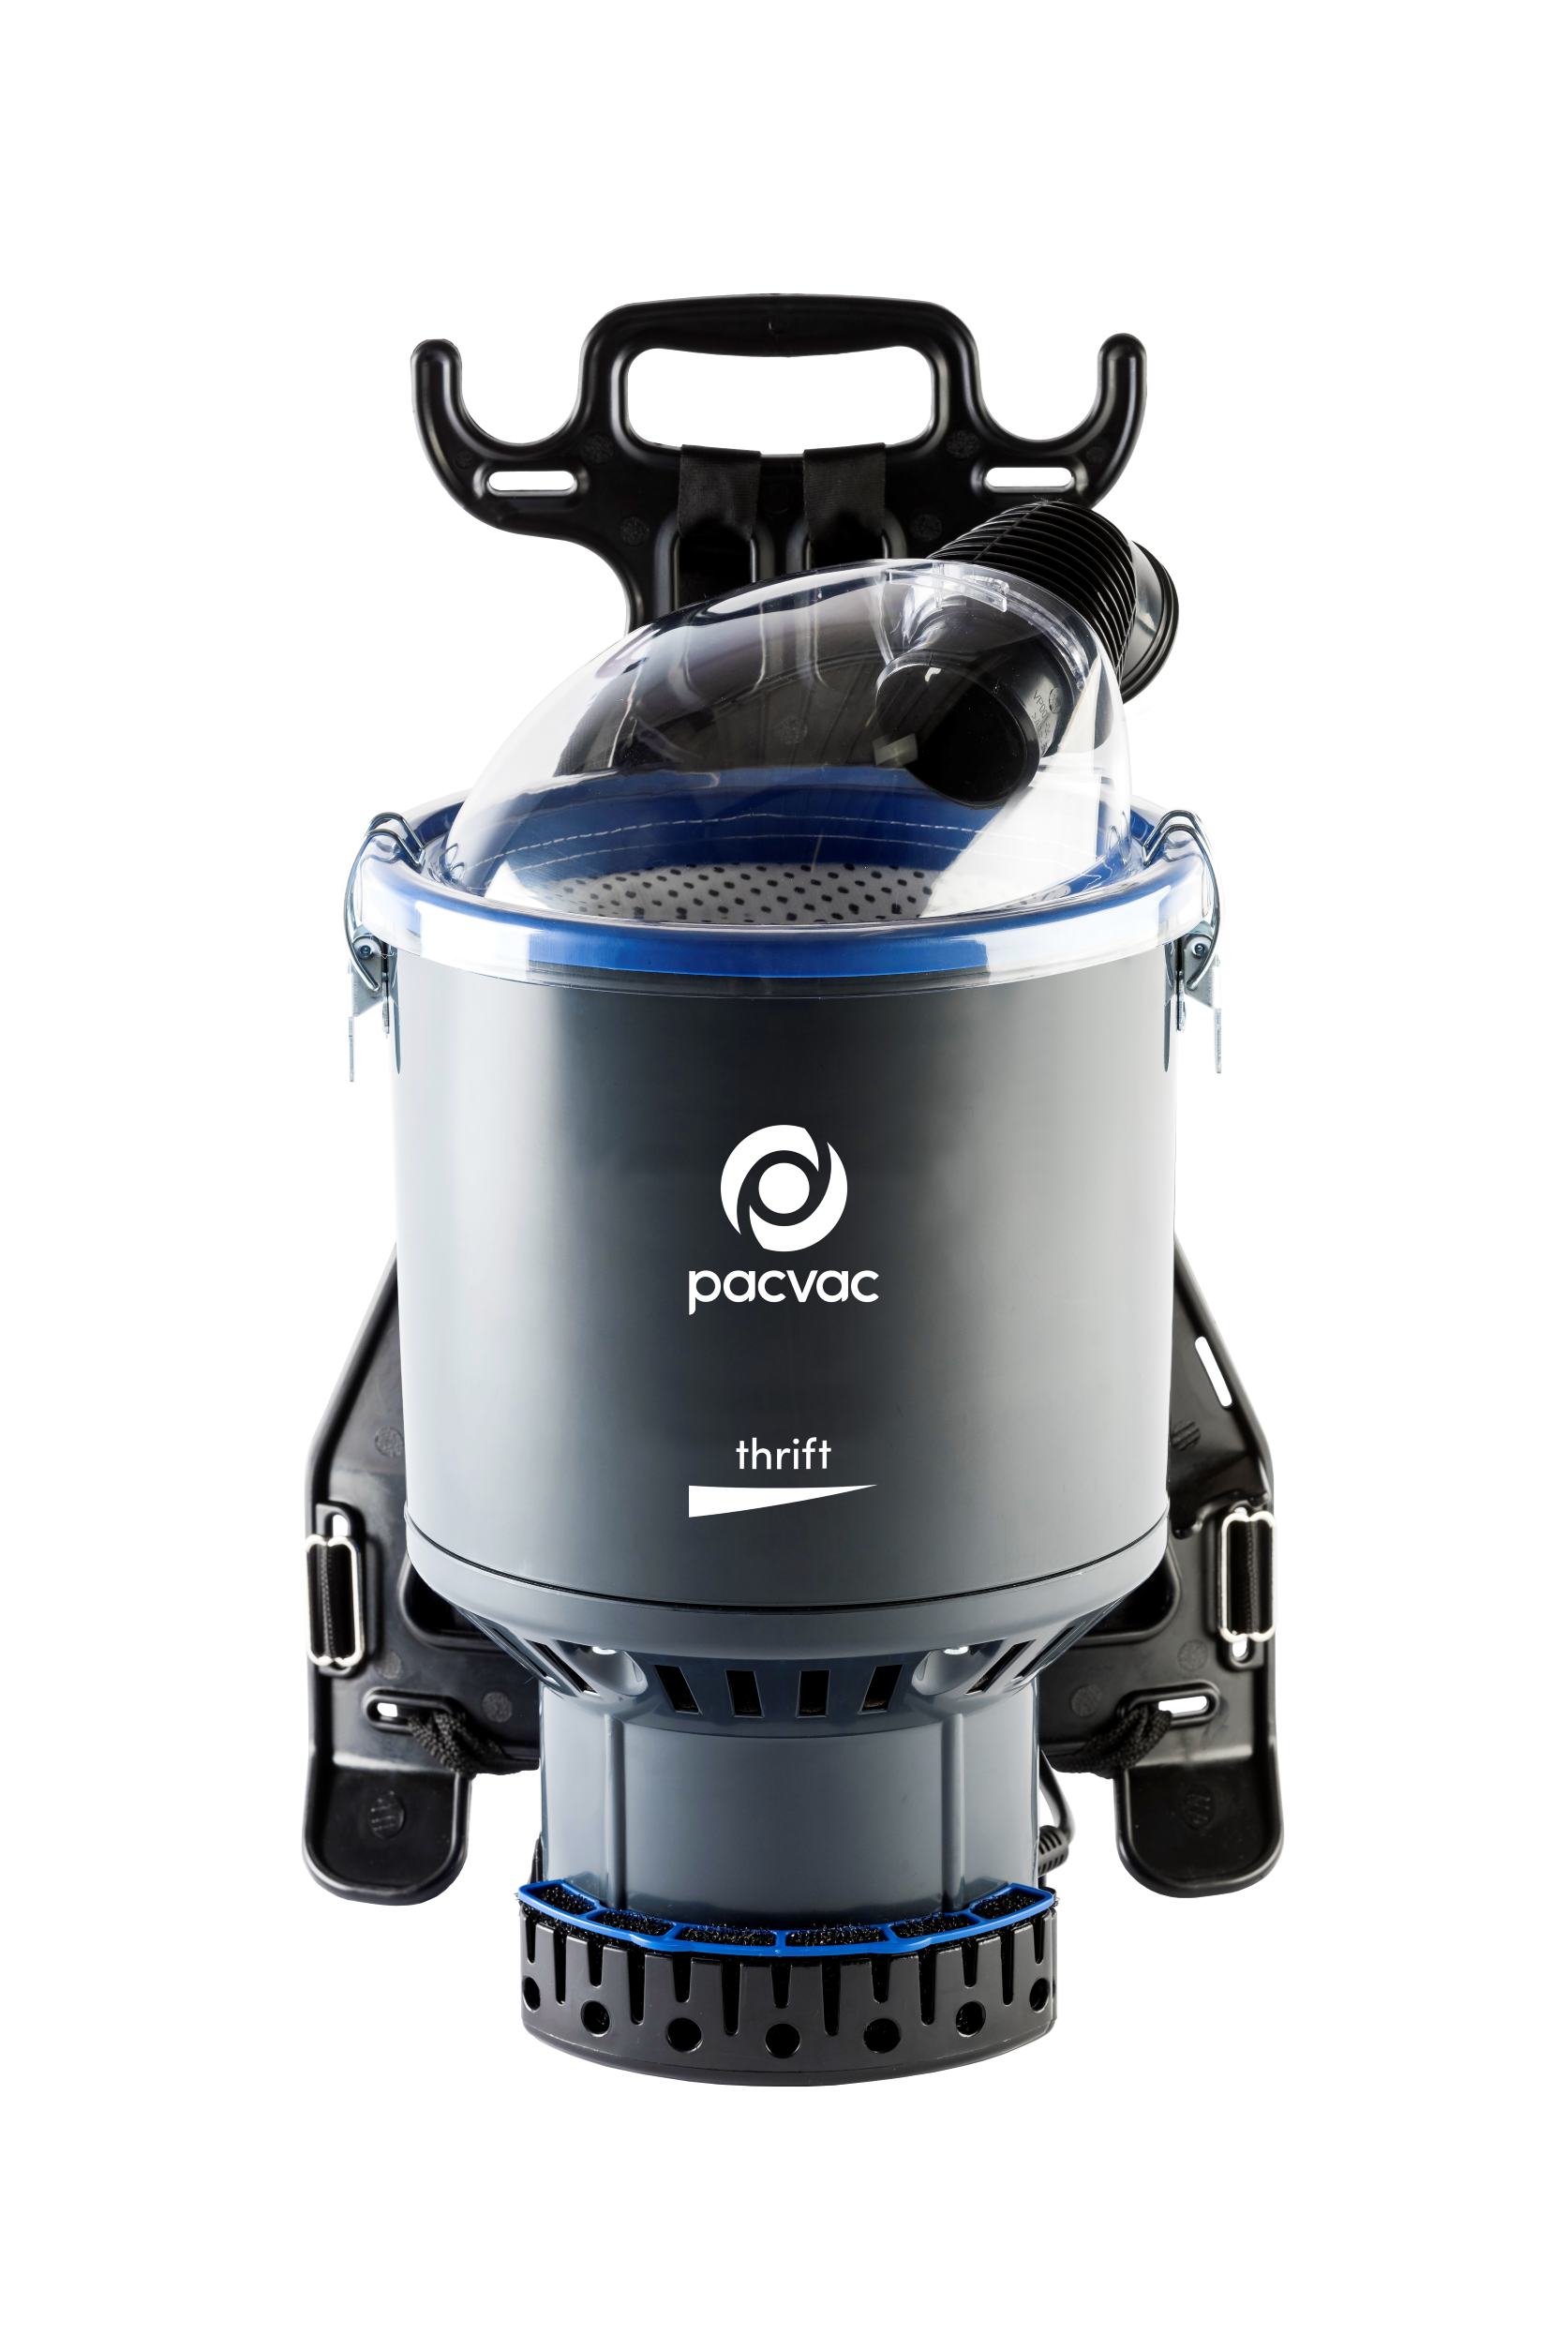 PACVAC THRIFT BACKPACK VACUUM CLEANER